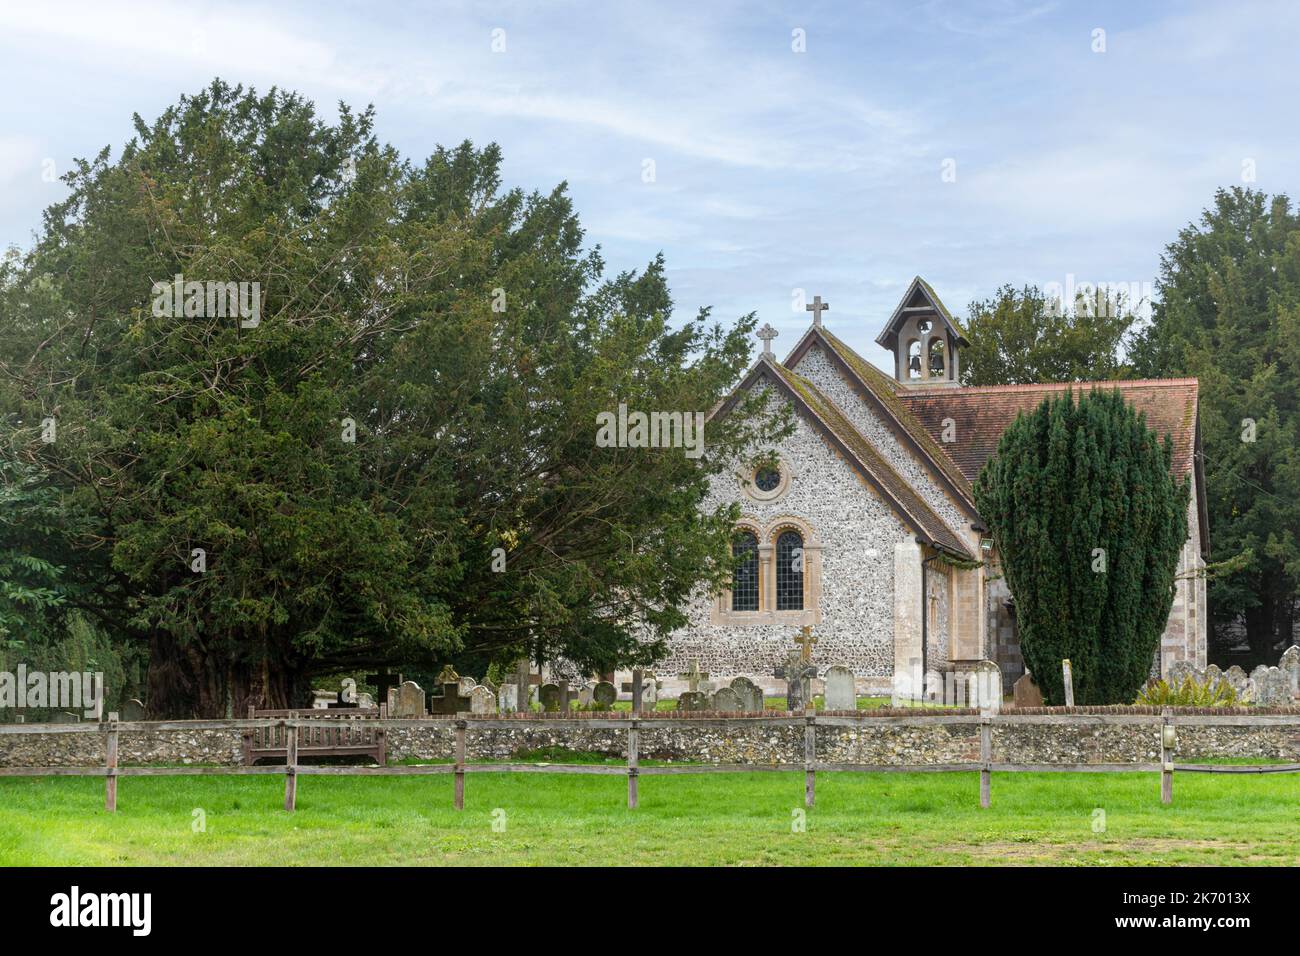 St John the Baptist Church in Itchen Abbas village, Hampshire, England, UK, with ancient yew tree Stock Photo